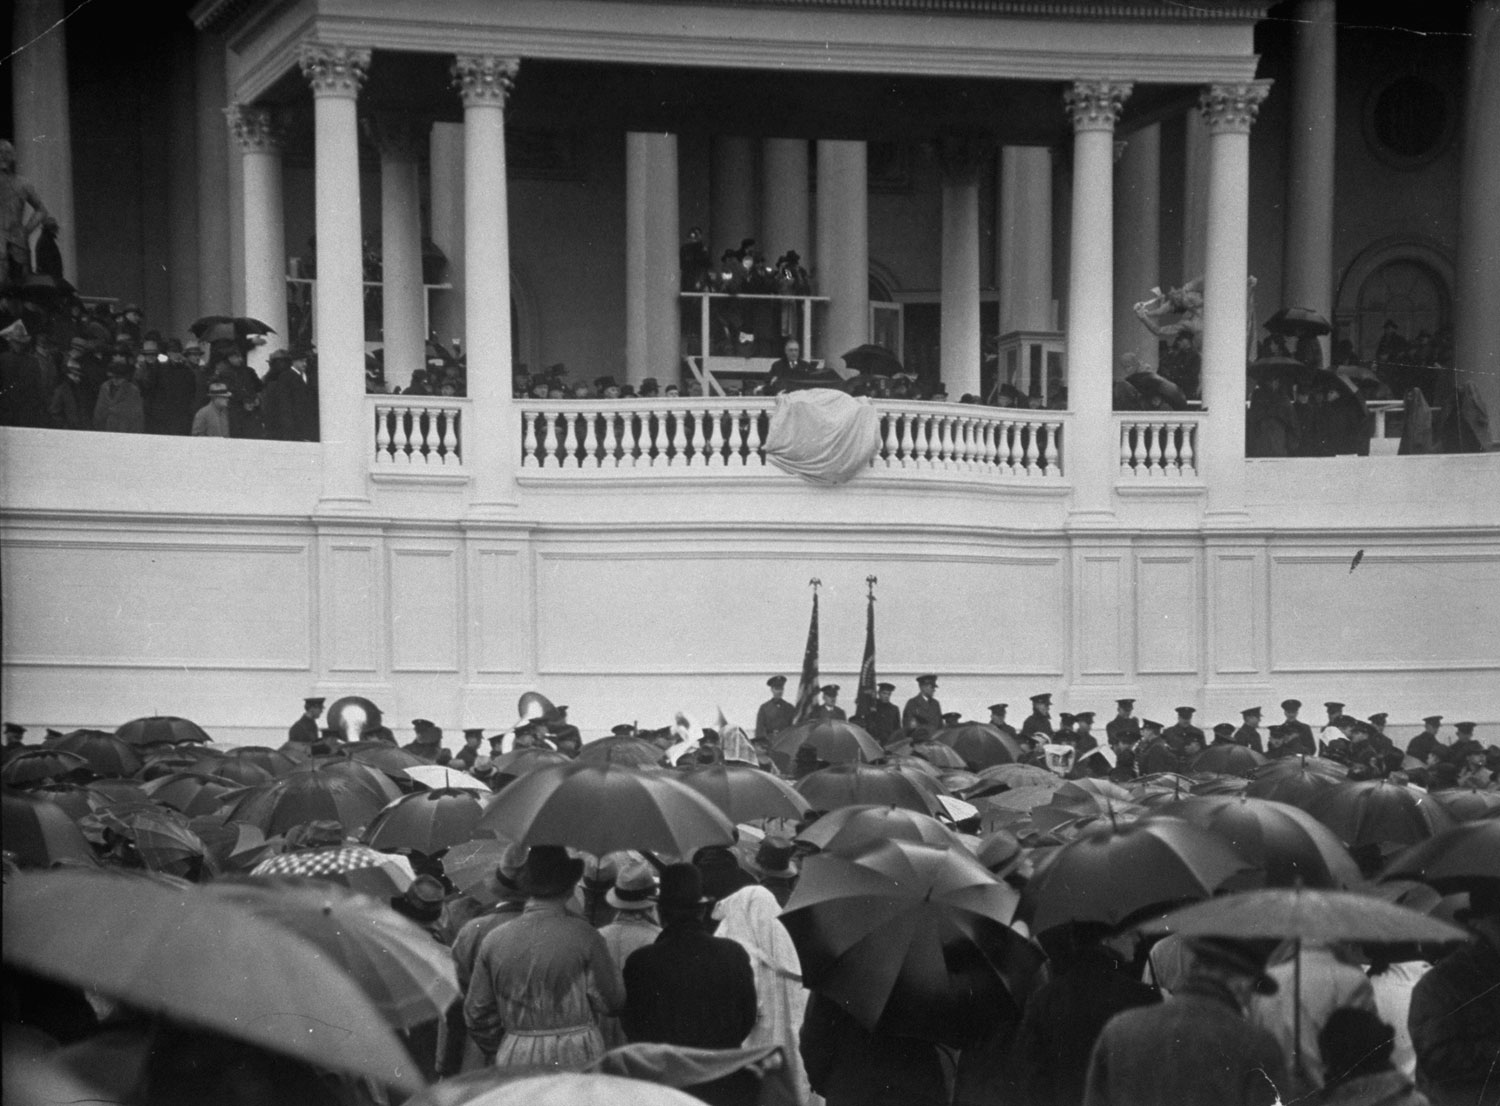 A crowd of 40,000 stands in the rain in front of the main entrance to the Capitol Building to witness Franklin D. Roosevelt's first inauguration, 1933.